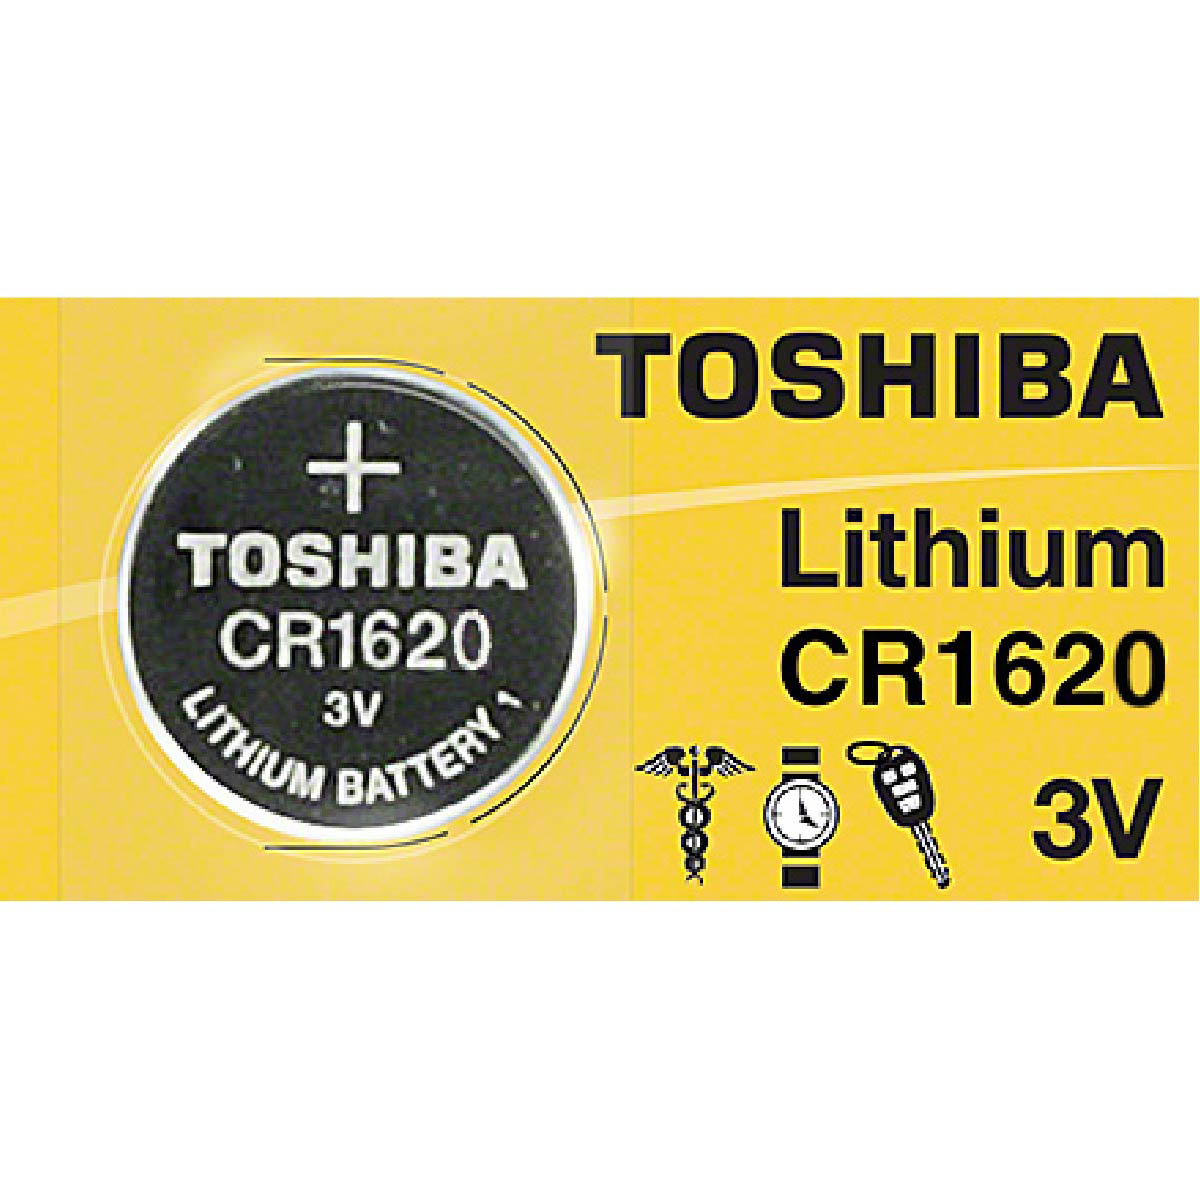 Toshiba CR1620 Battery 3V Lithium Coin Cell (6 PCS Child Resistant Blister  Package)